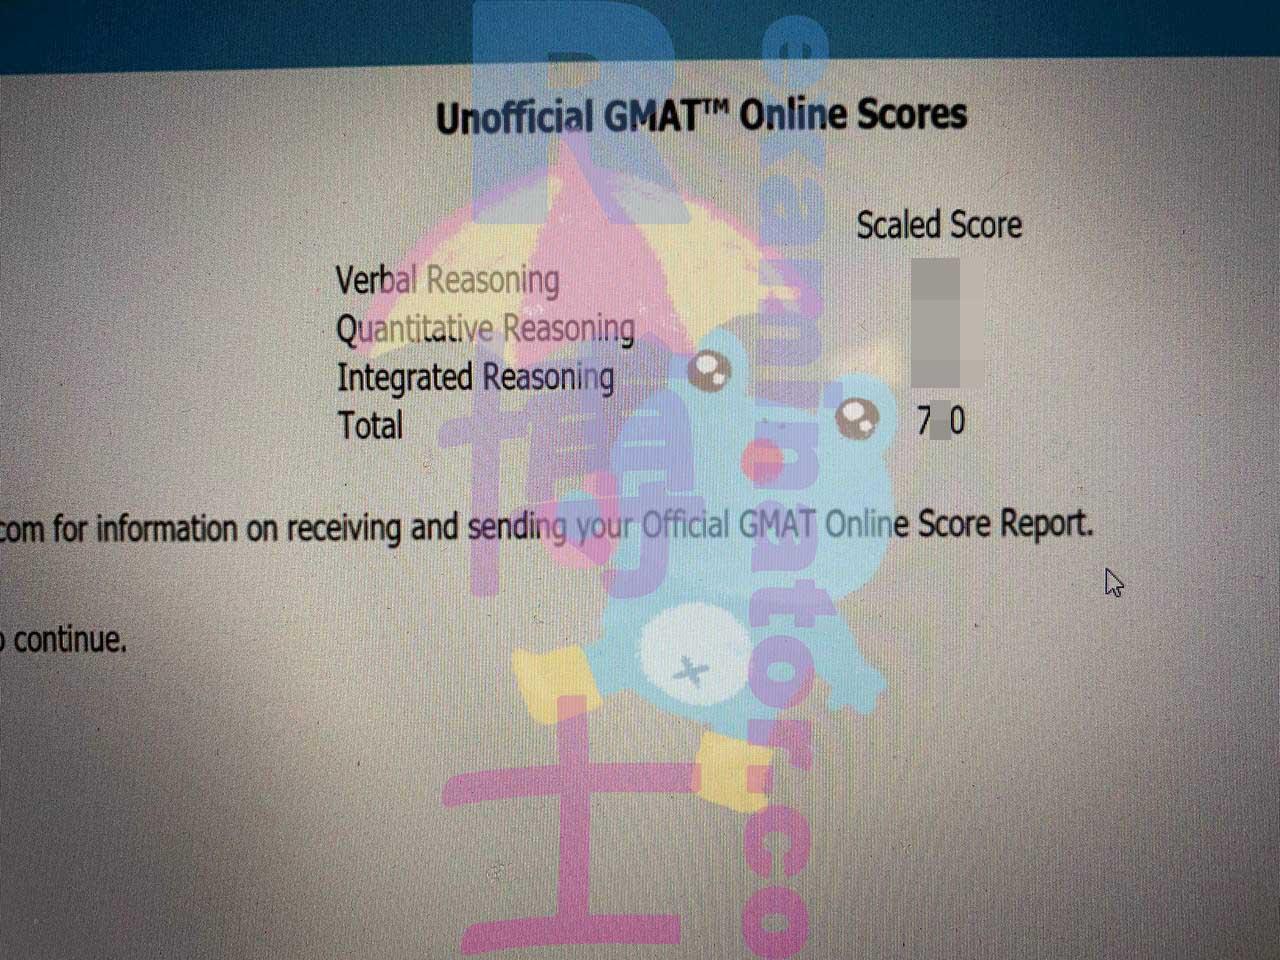 score image for GMAT Cheating success story #326